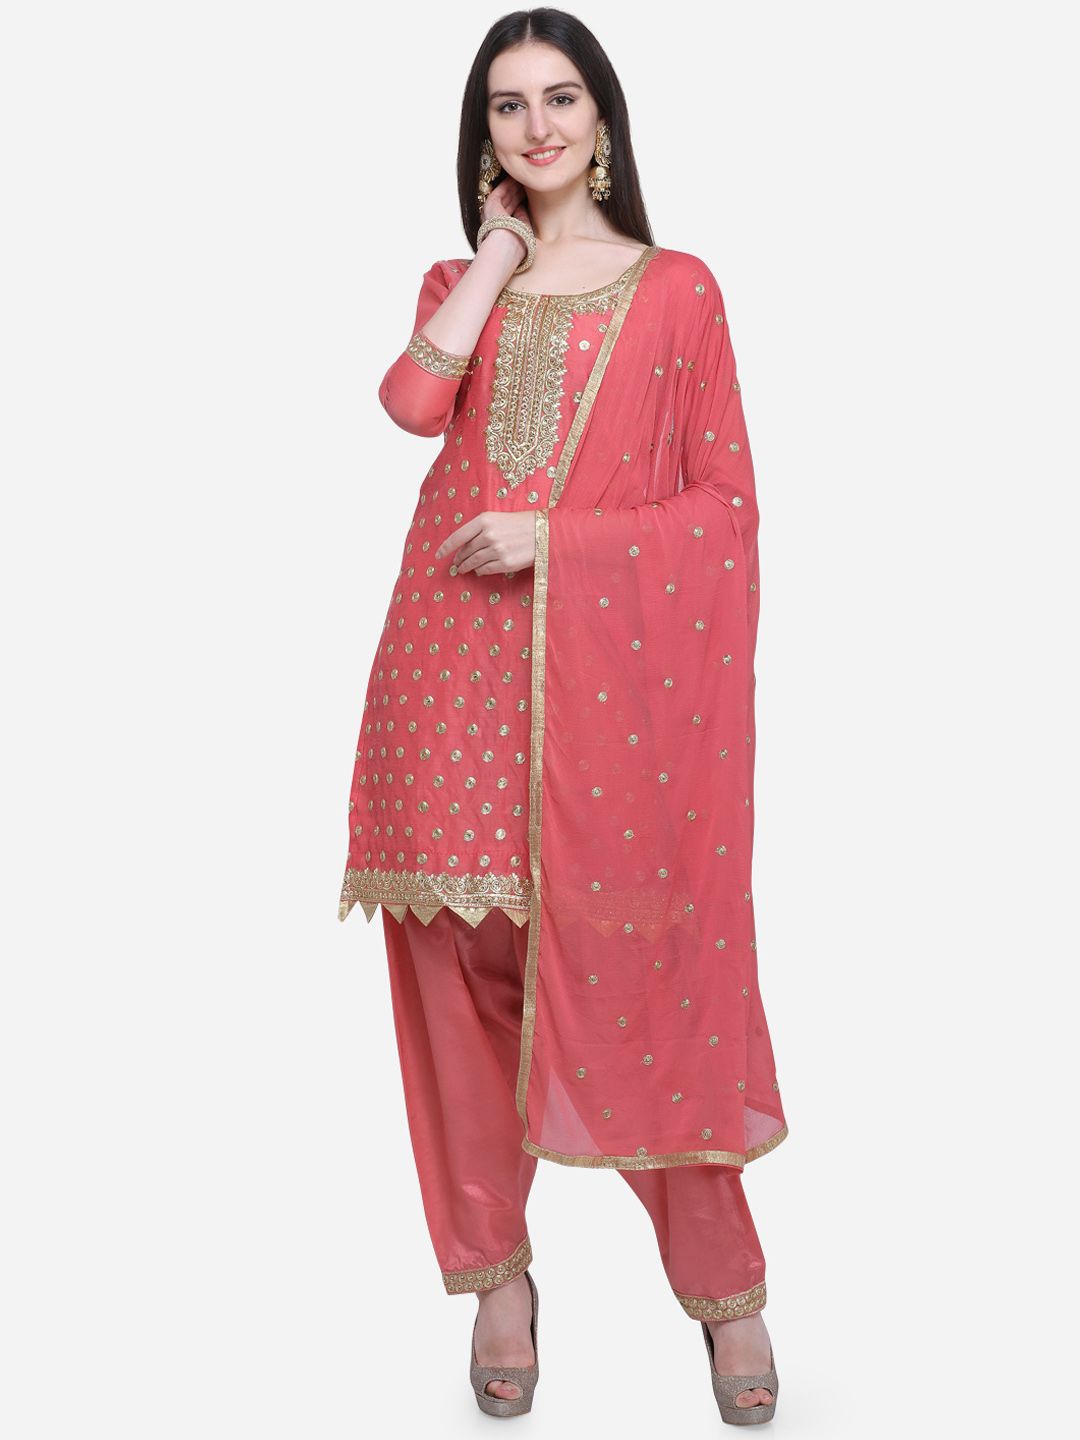 Ethnic Junction Peach-Coloured & Gold-Toned Cotton Blend Unstitched Dress Material Price in India